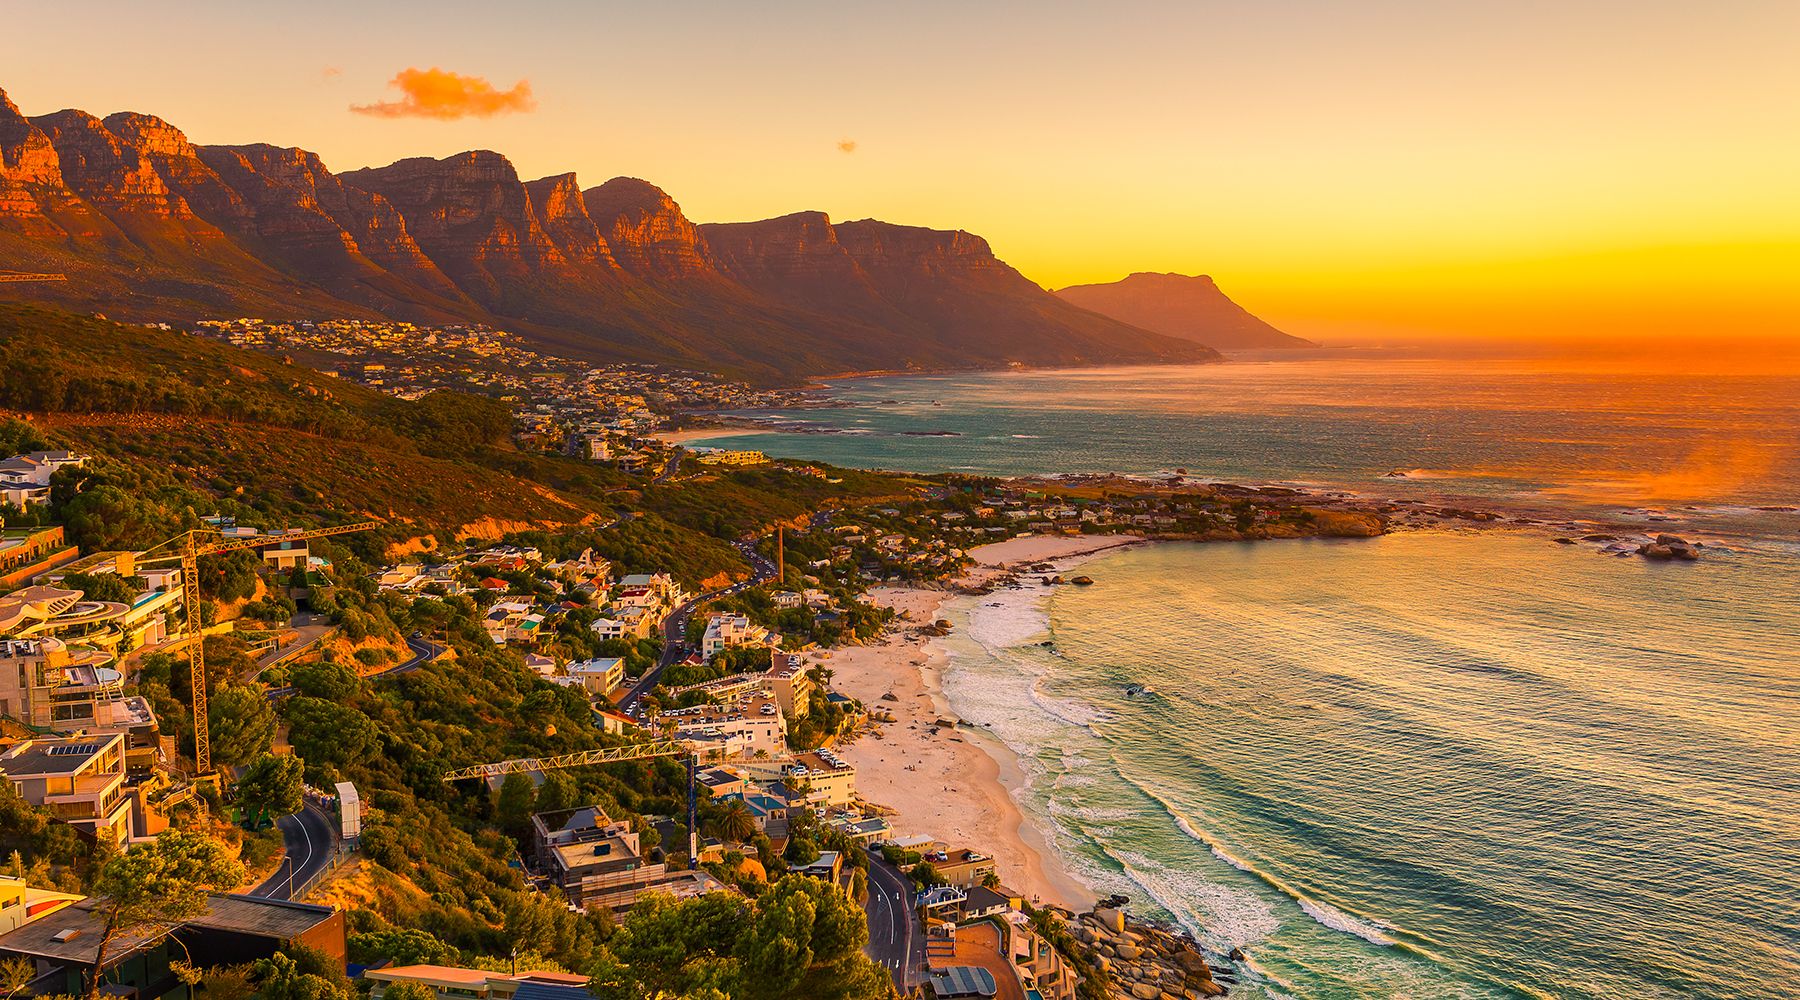 tourist attractions in south africa cape town